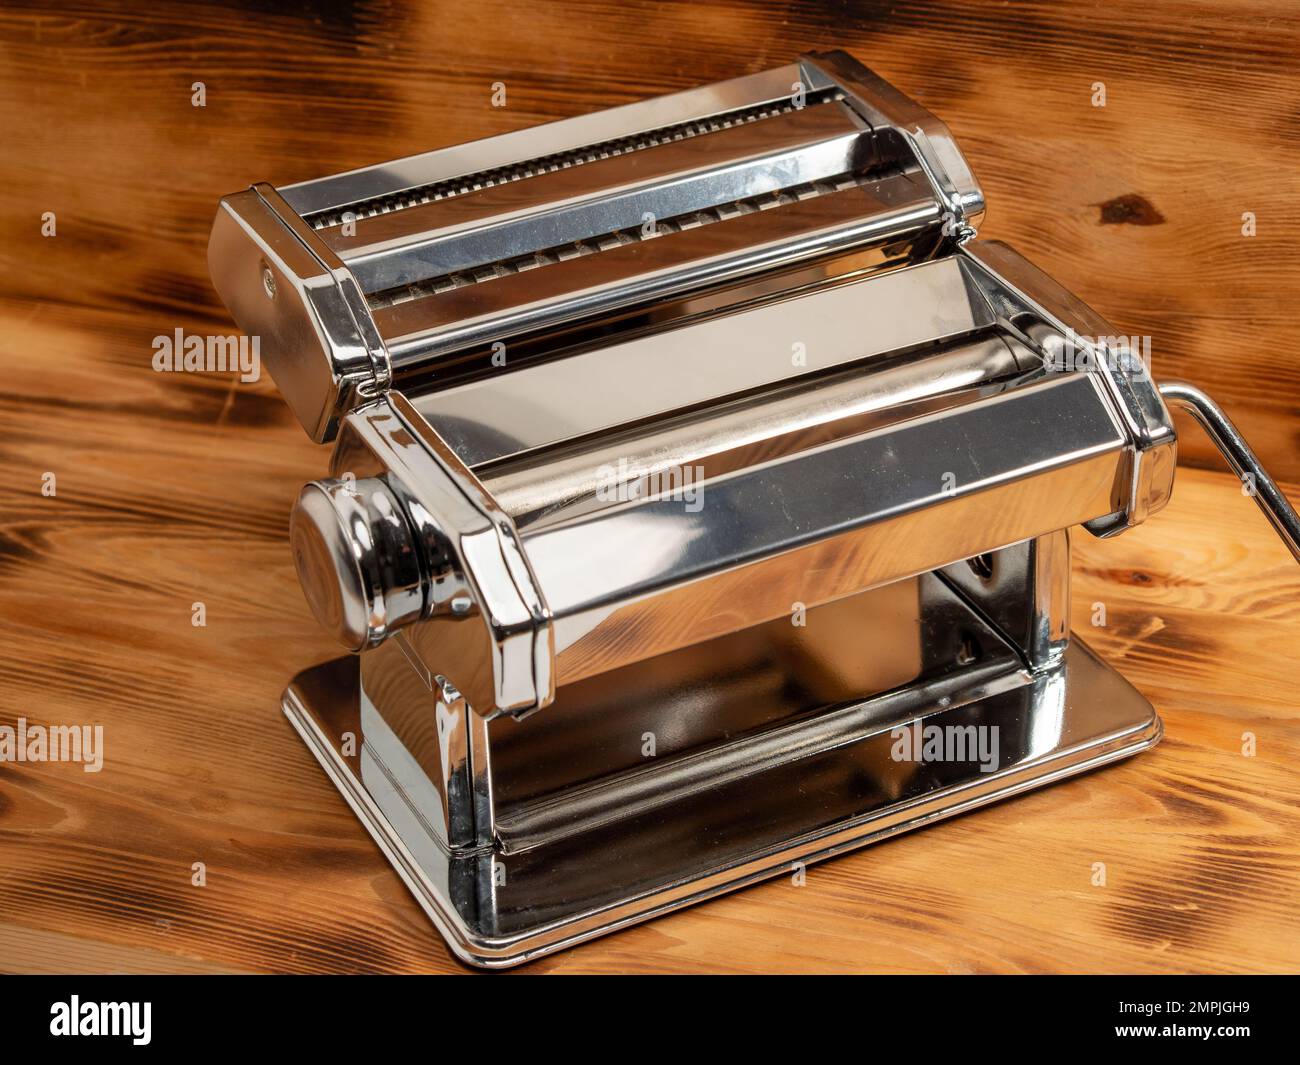 Metal Reflective Pasta Machine With Separated Hand Crank Wood Su Stock  Photo - Download Image Now - iStock